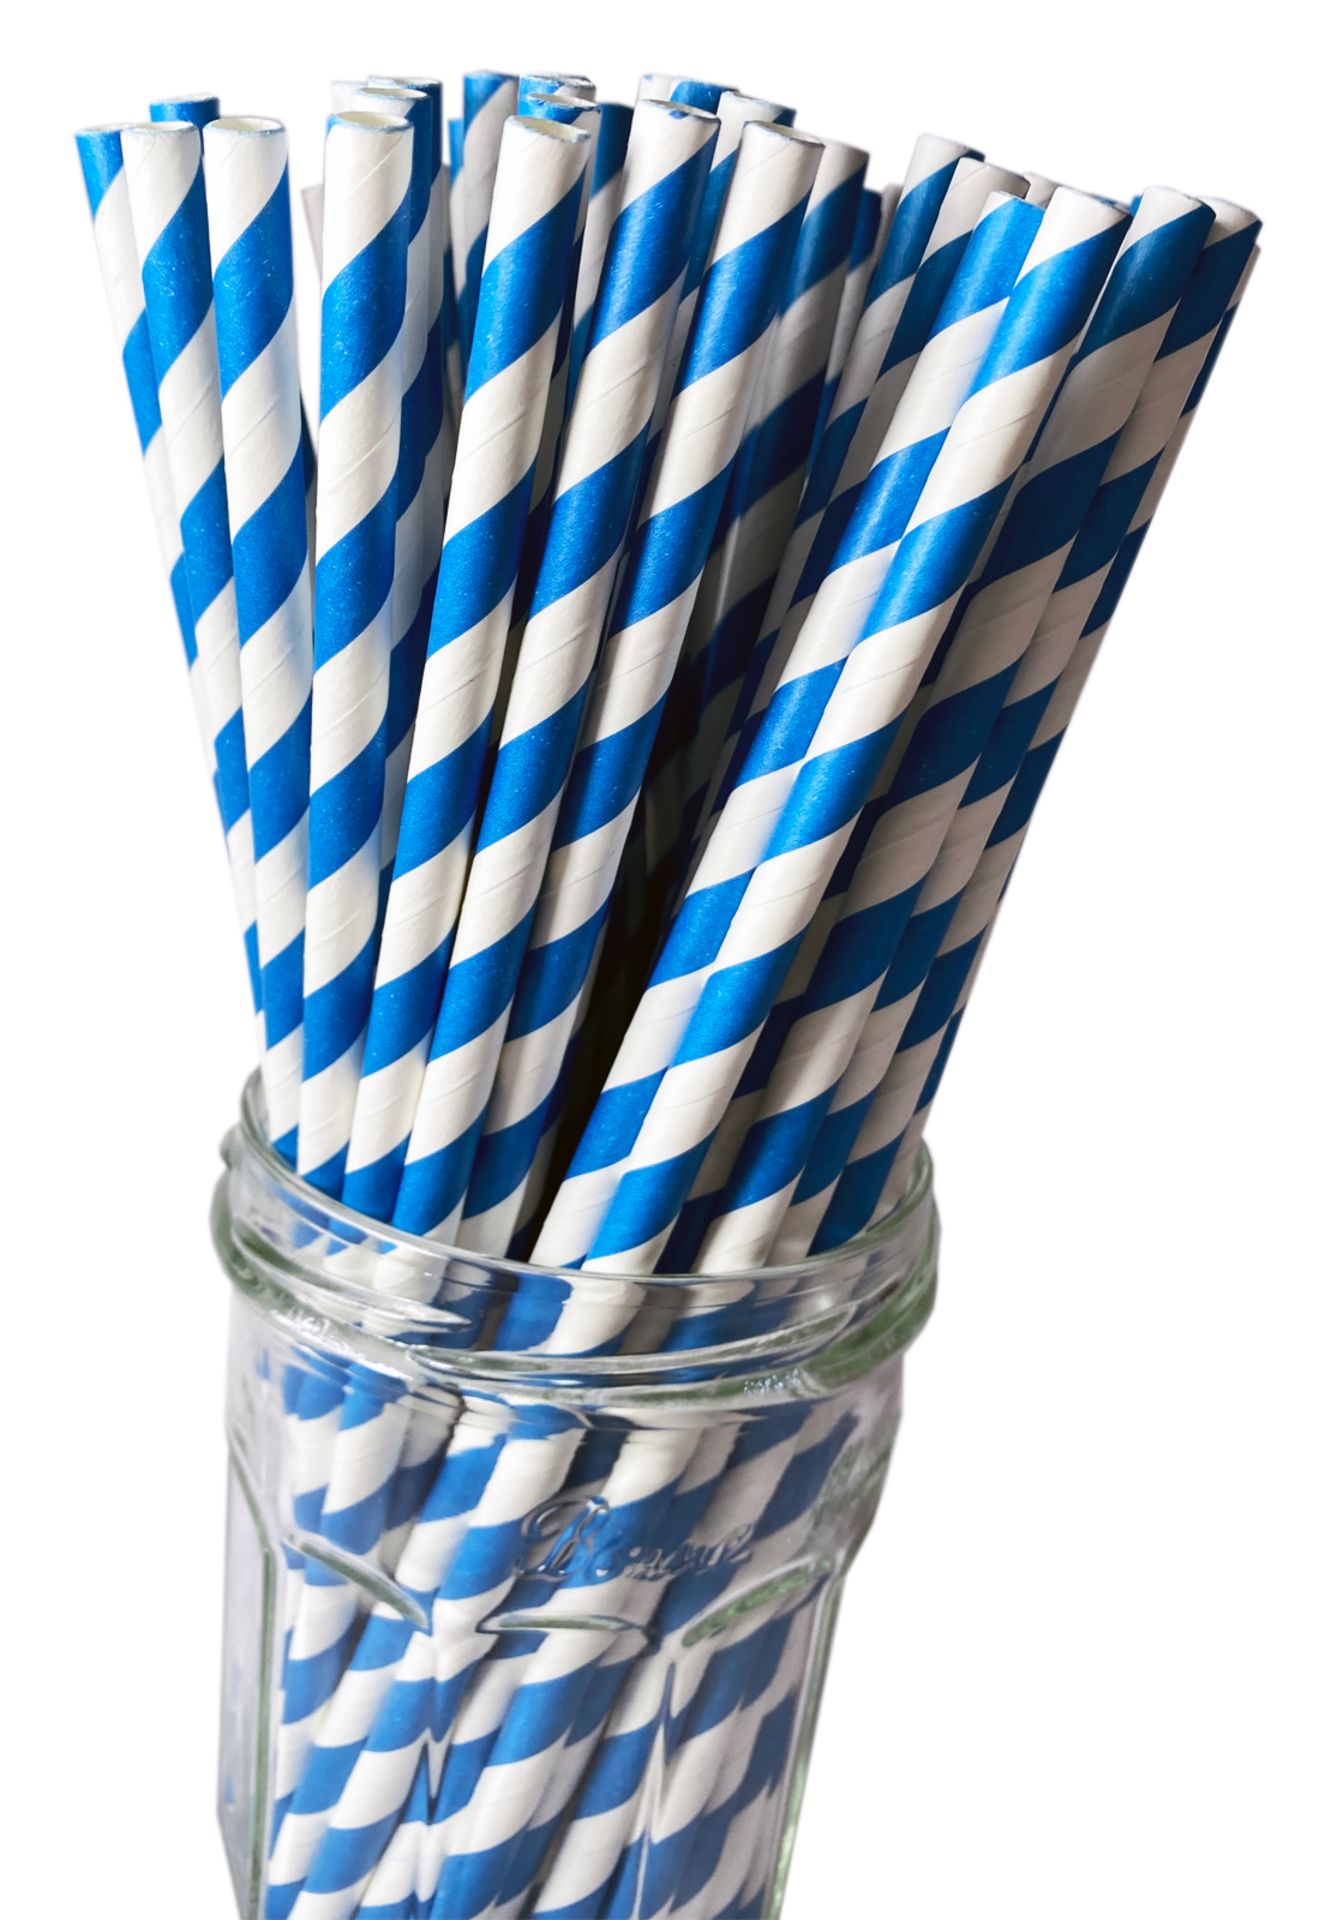 5 x Boxes of Candy Twist Paper Straws by 888 Gastro Disposables - Image 4 of 4